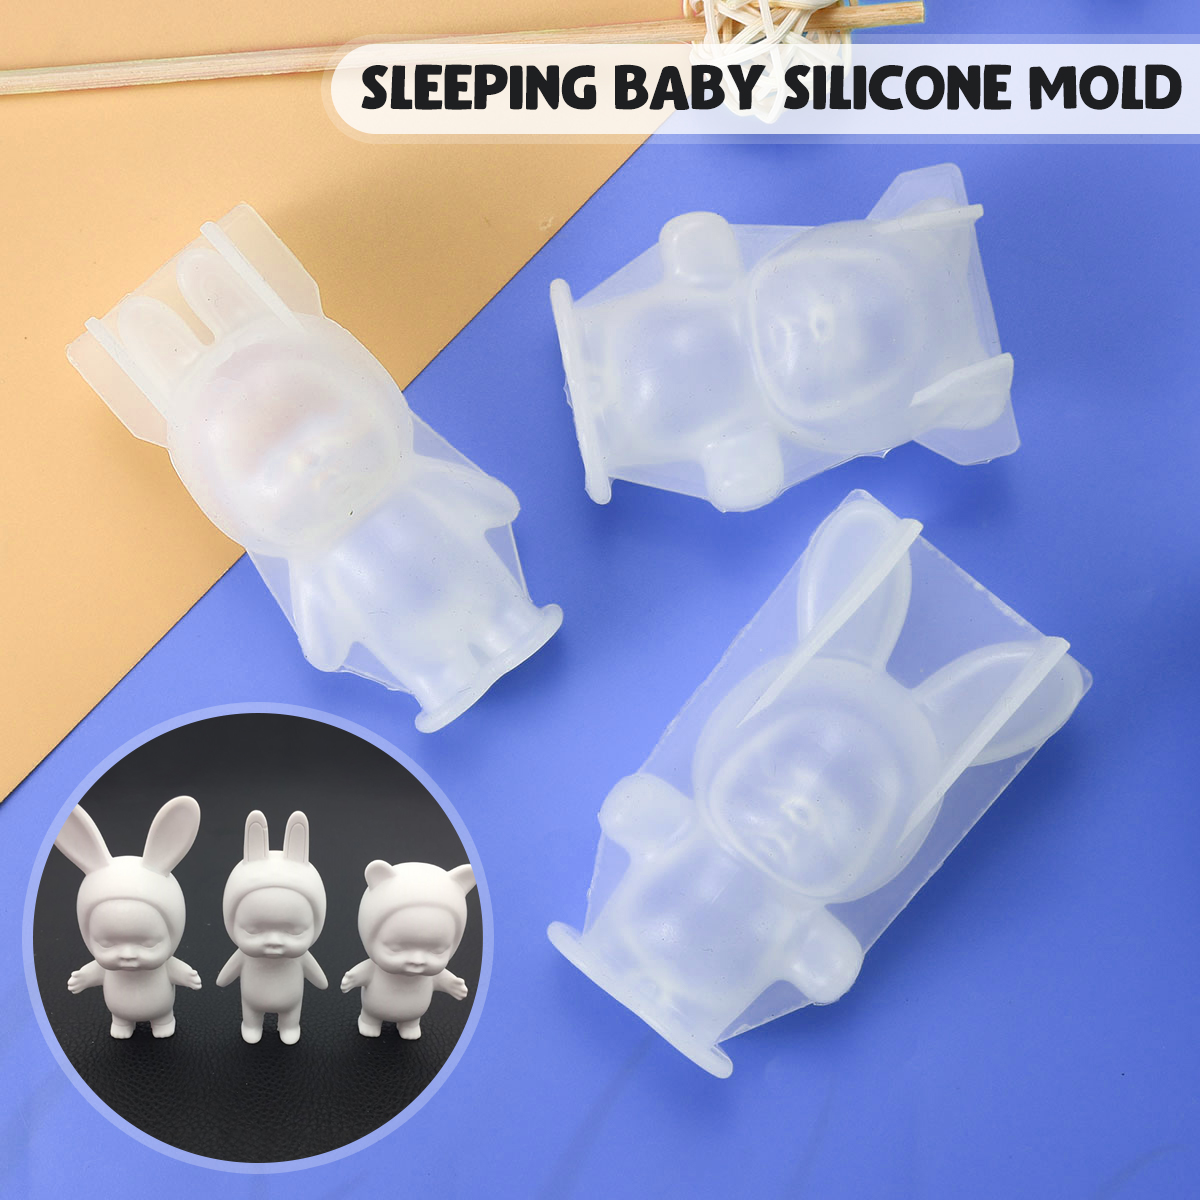 SML-DIY-Silicone-Mold-Sleeping-Baby-Mould-Aromatherapy-Plaster-Storage-Container-1673430-2